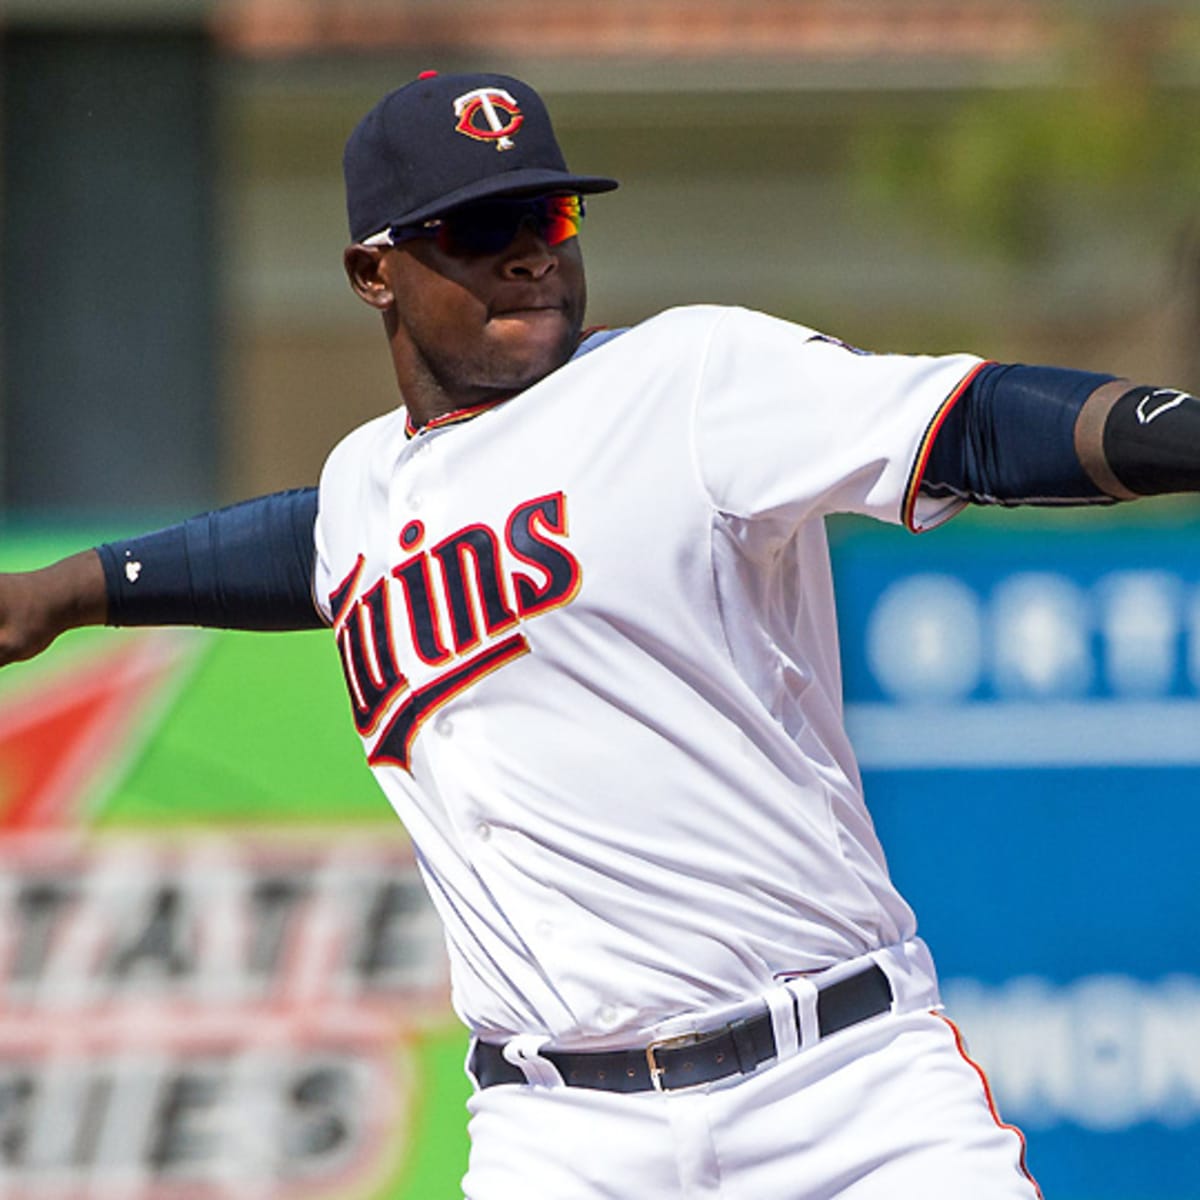 Is Miguel Sano the next top power-hitting prospect?